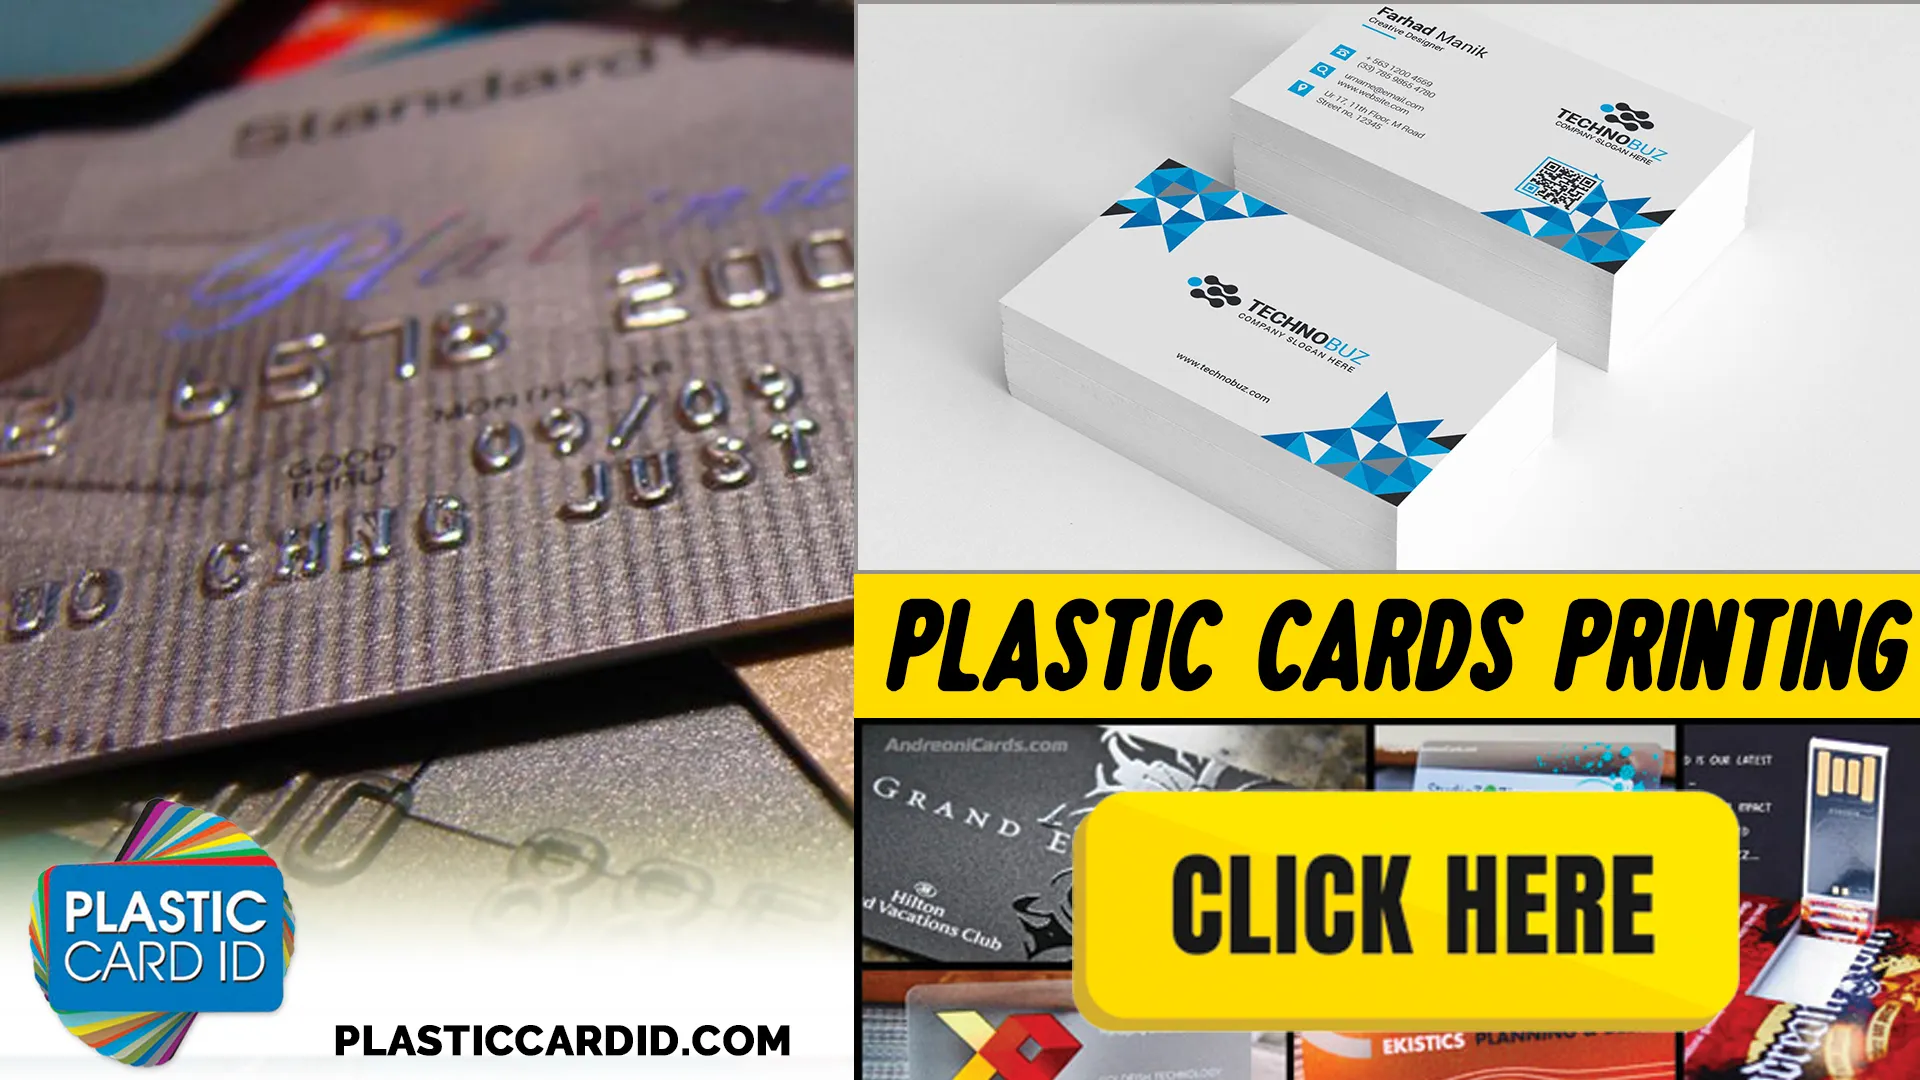 Joining Plastic Card ID
's Recycling Movement